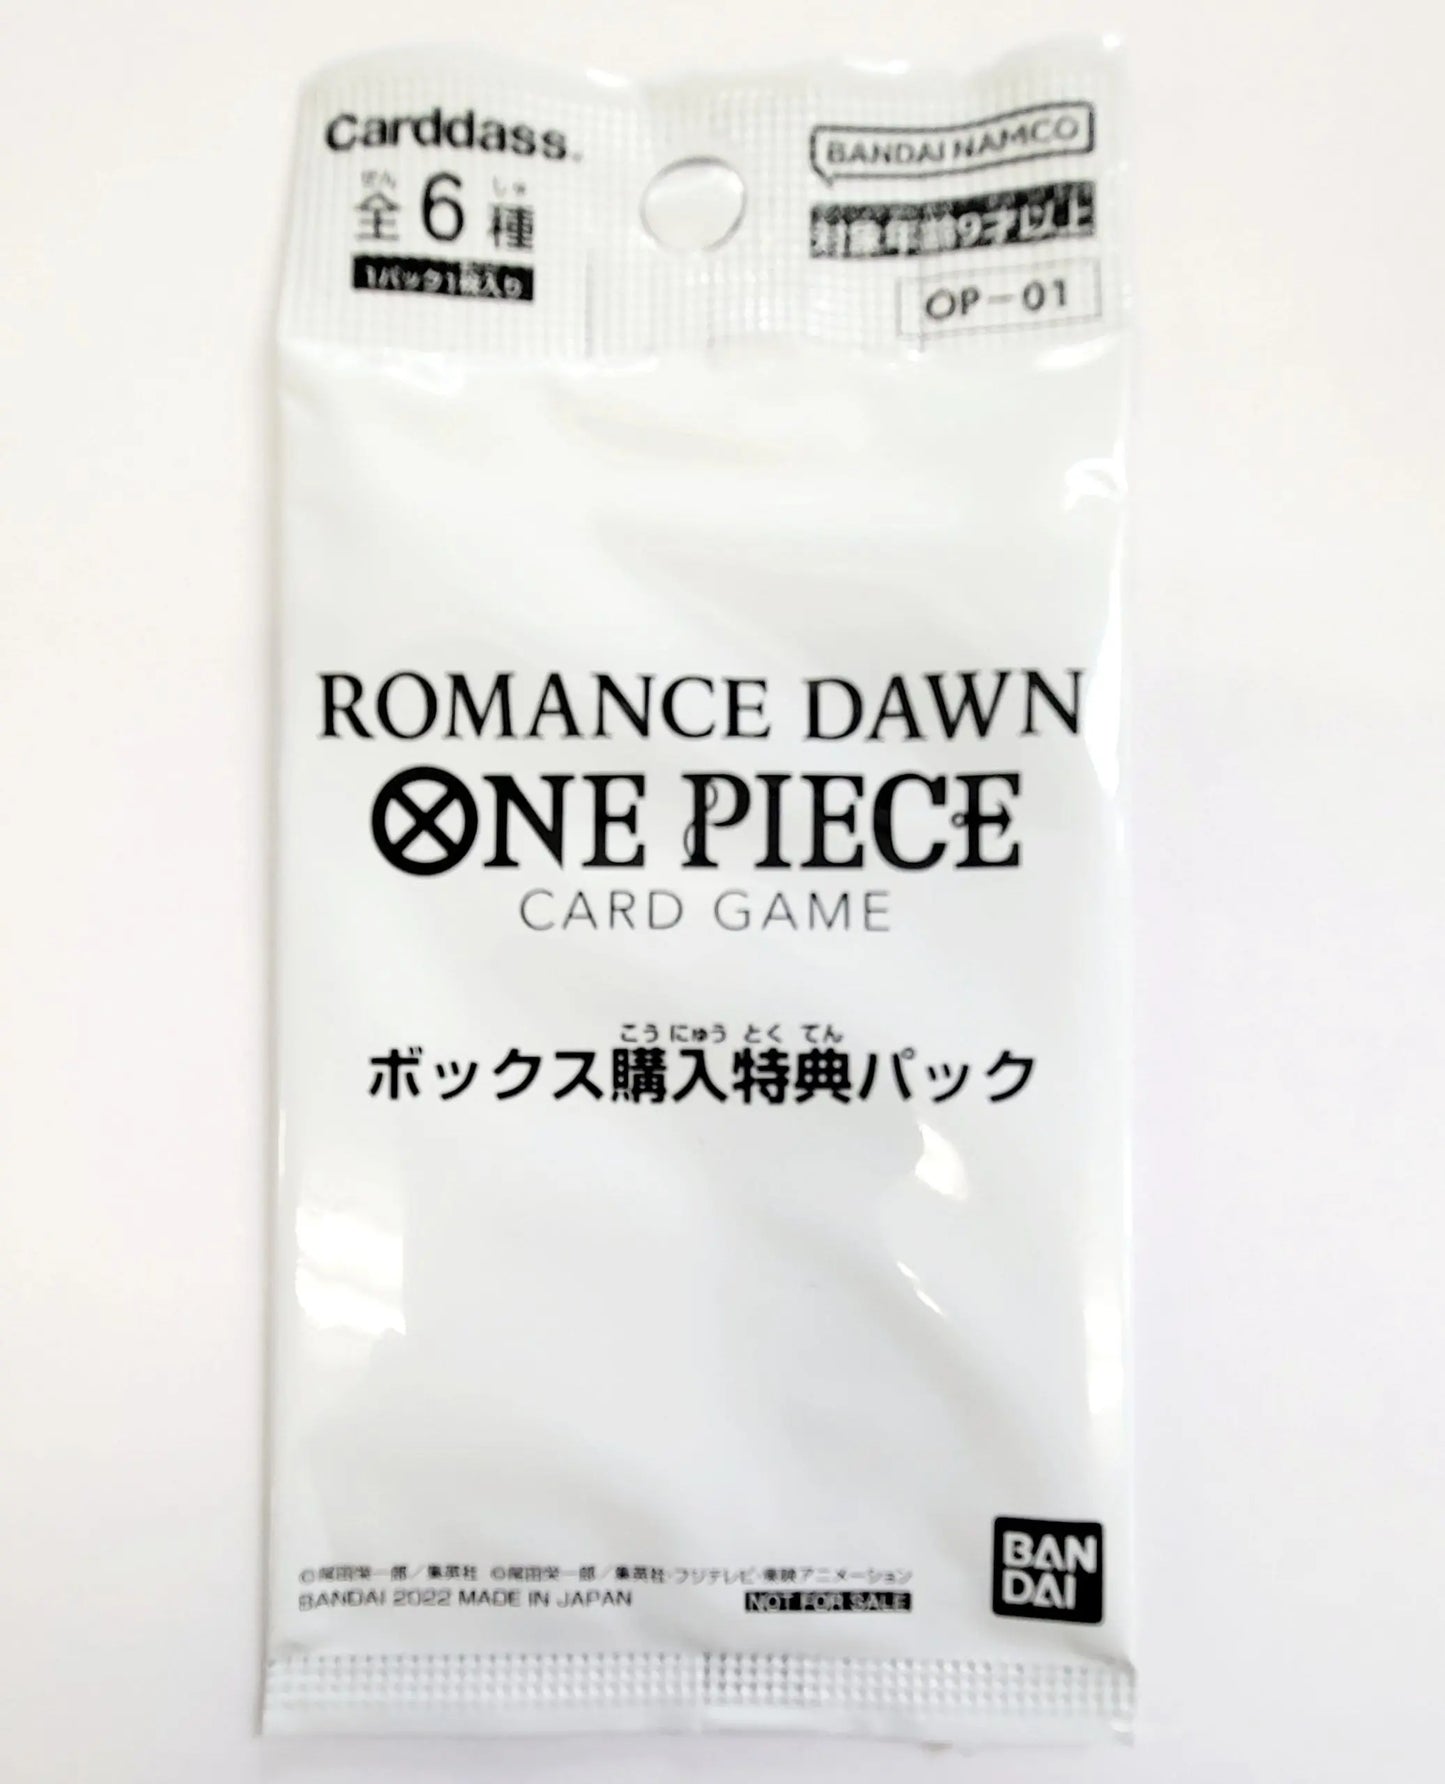 One Piece Card Game Romance Dawn Box Promotion Pack Japanese